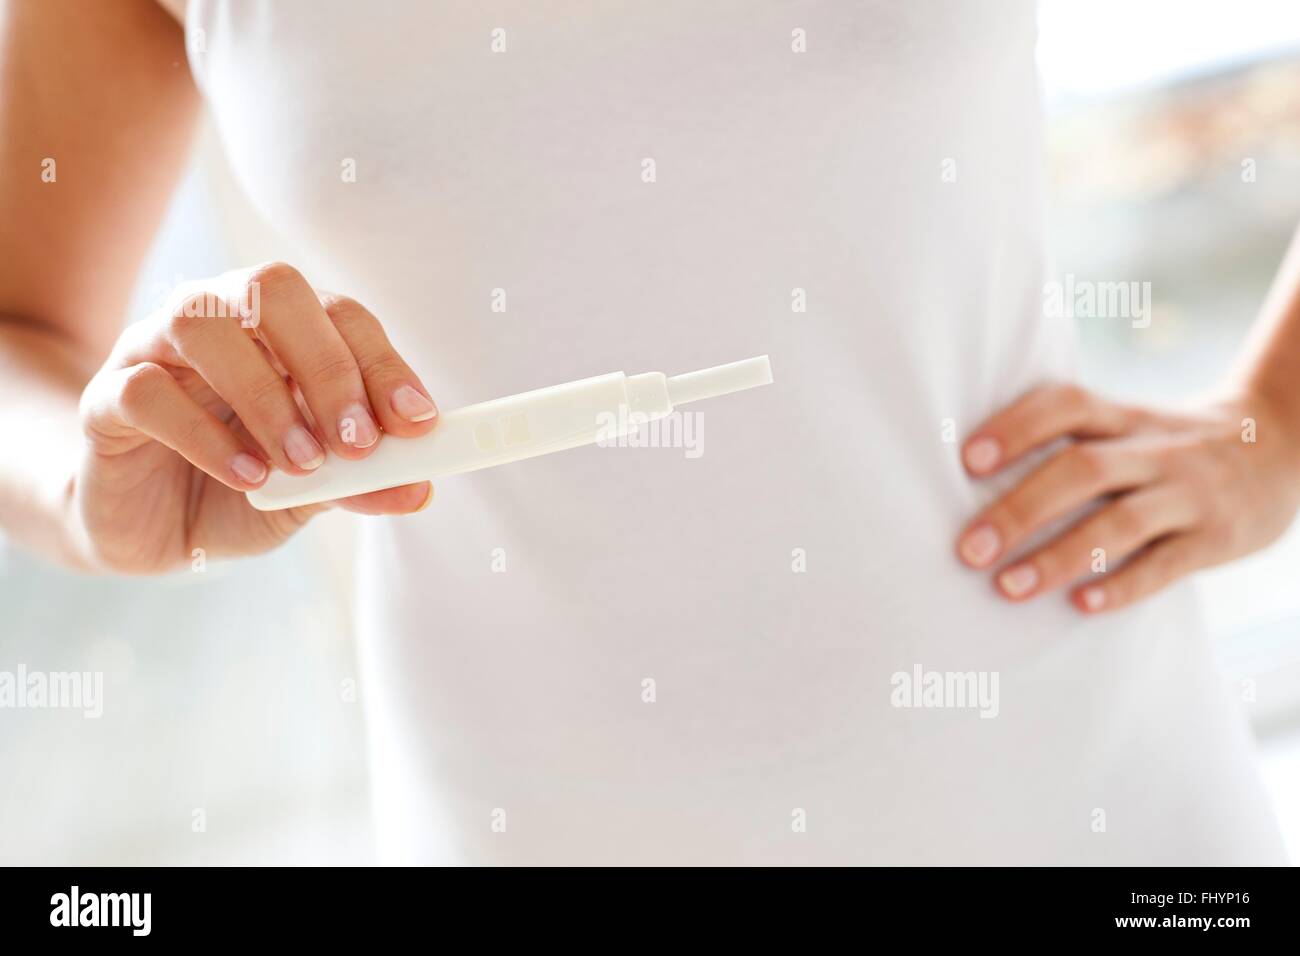 MODEL RELEASED. Woman taking a pregnancy test. Stock Photo